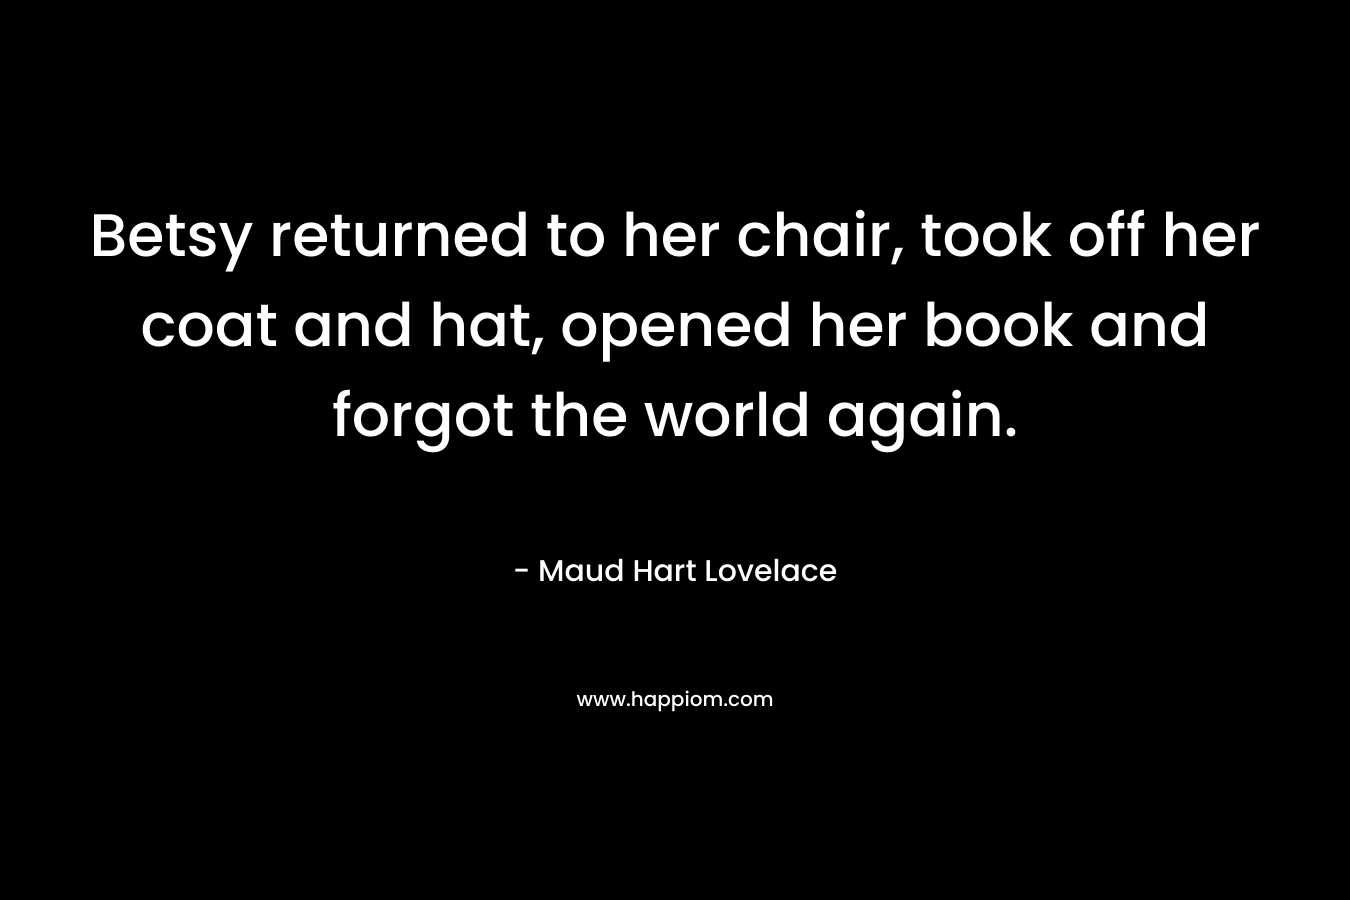 Betsy returned to her chair, took off her coat and hat, opened her book and forgot the world again.